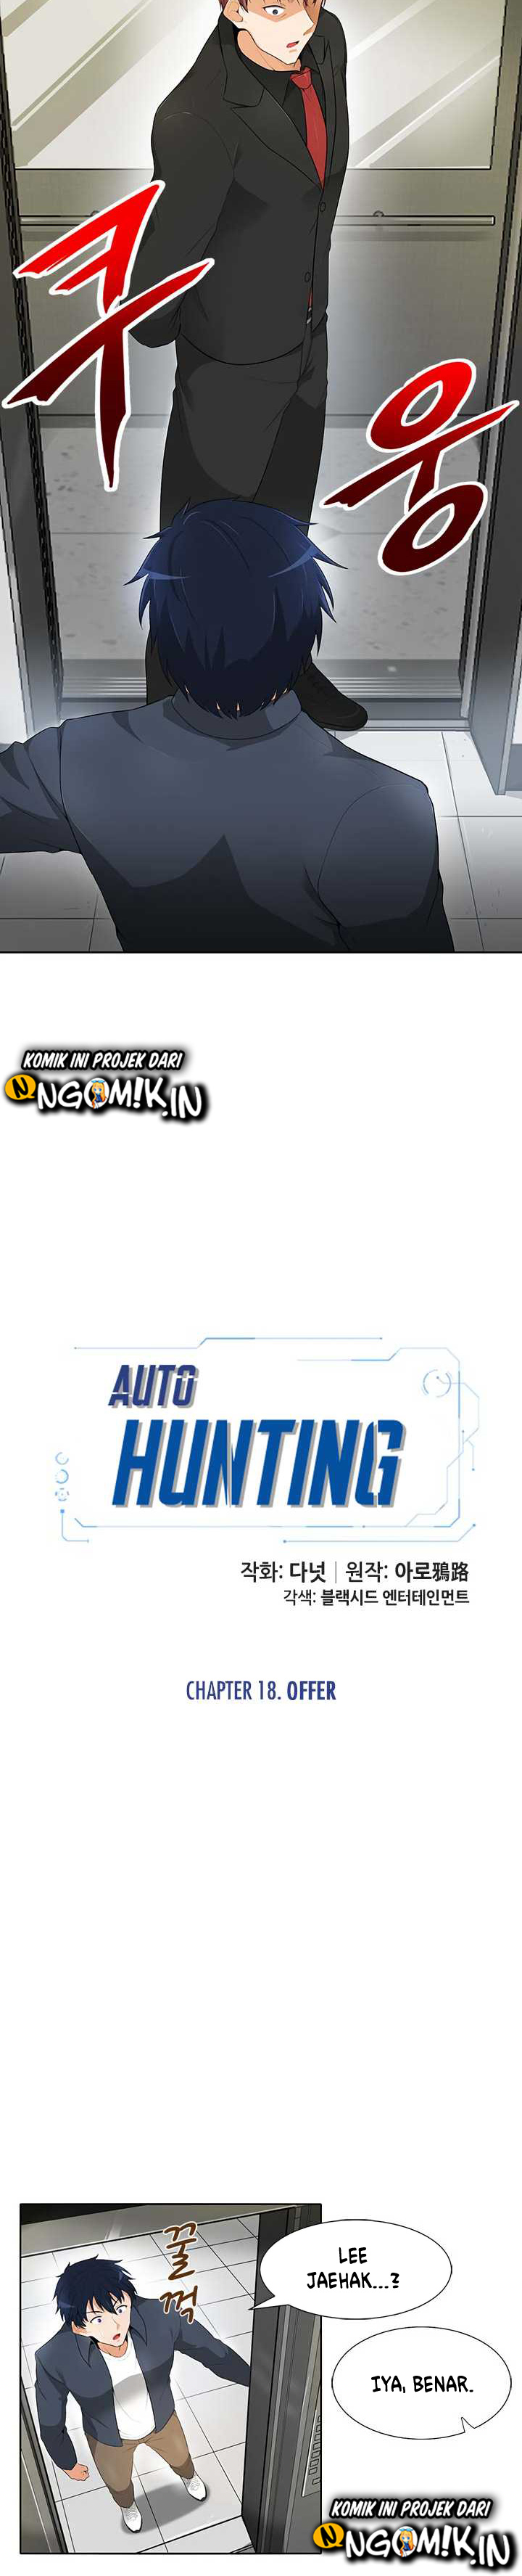 Auto Hunting Chapter 18